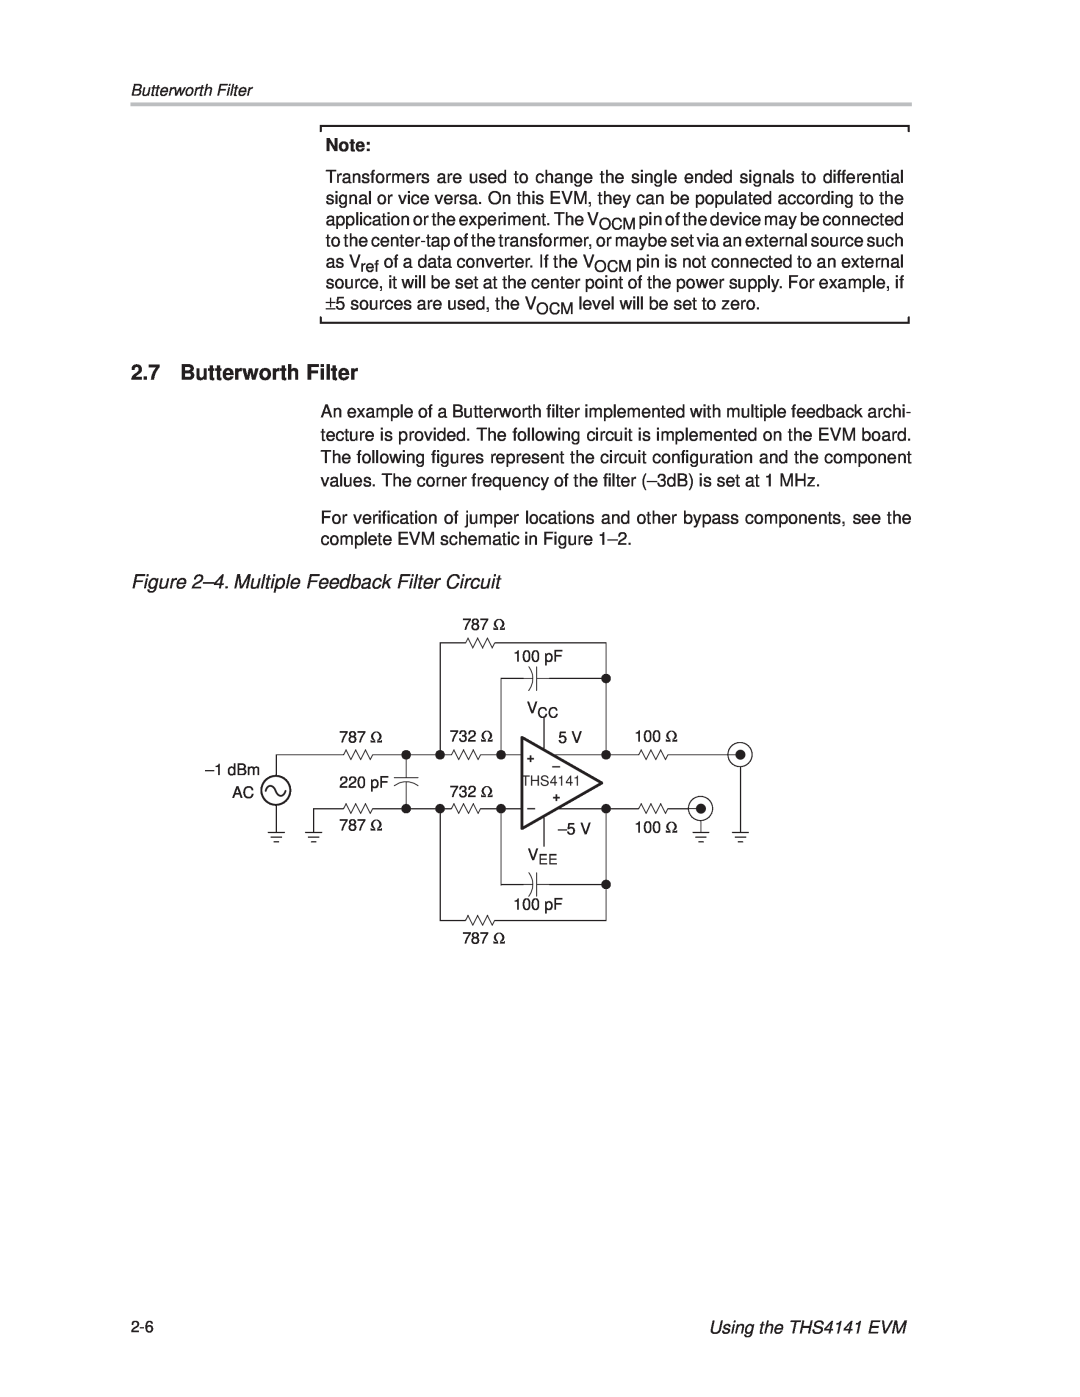 Texas Instruments manual Butterworth Filter, ±4. Multiple Feedback Filter Circuit, Using the THS4141 EVM 